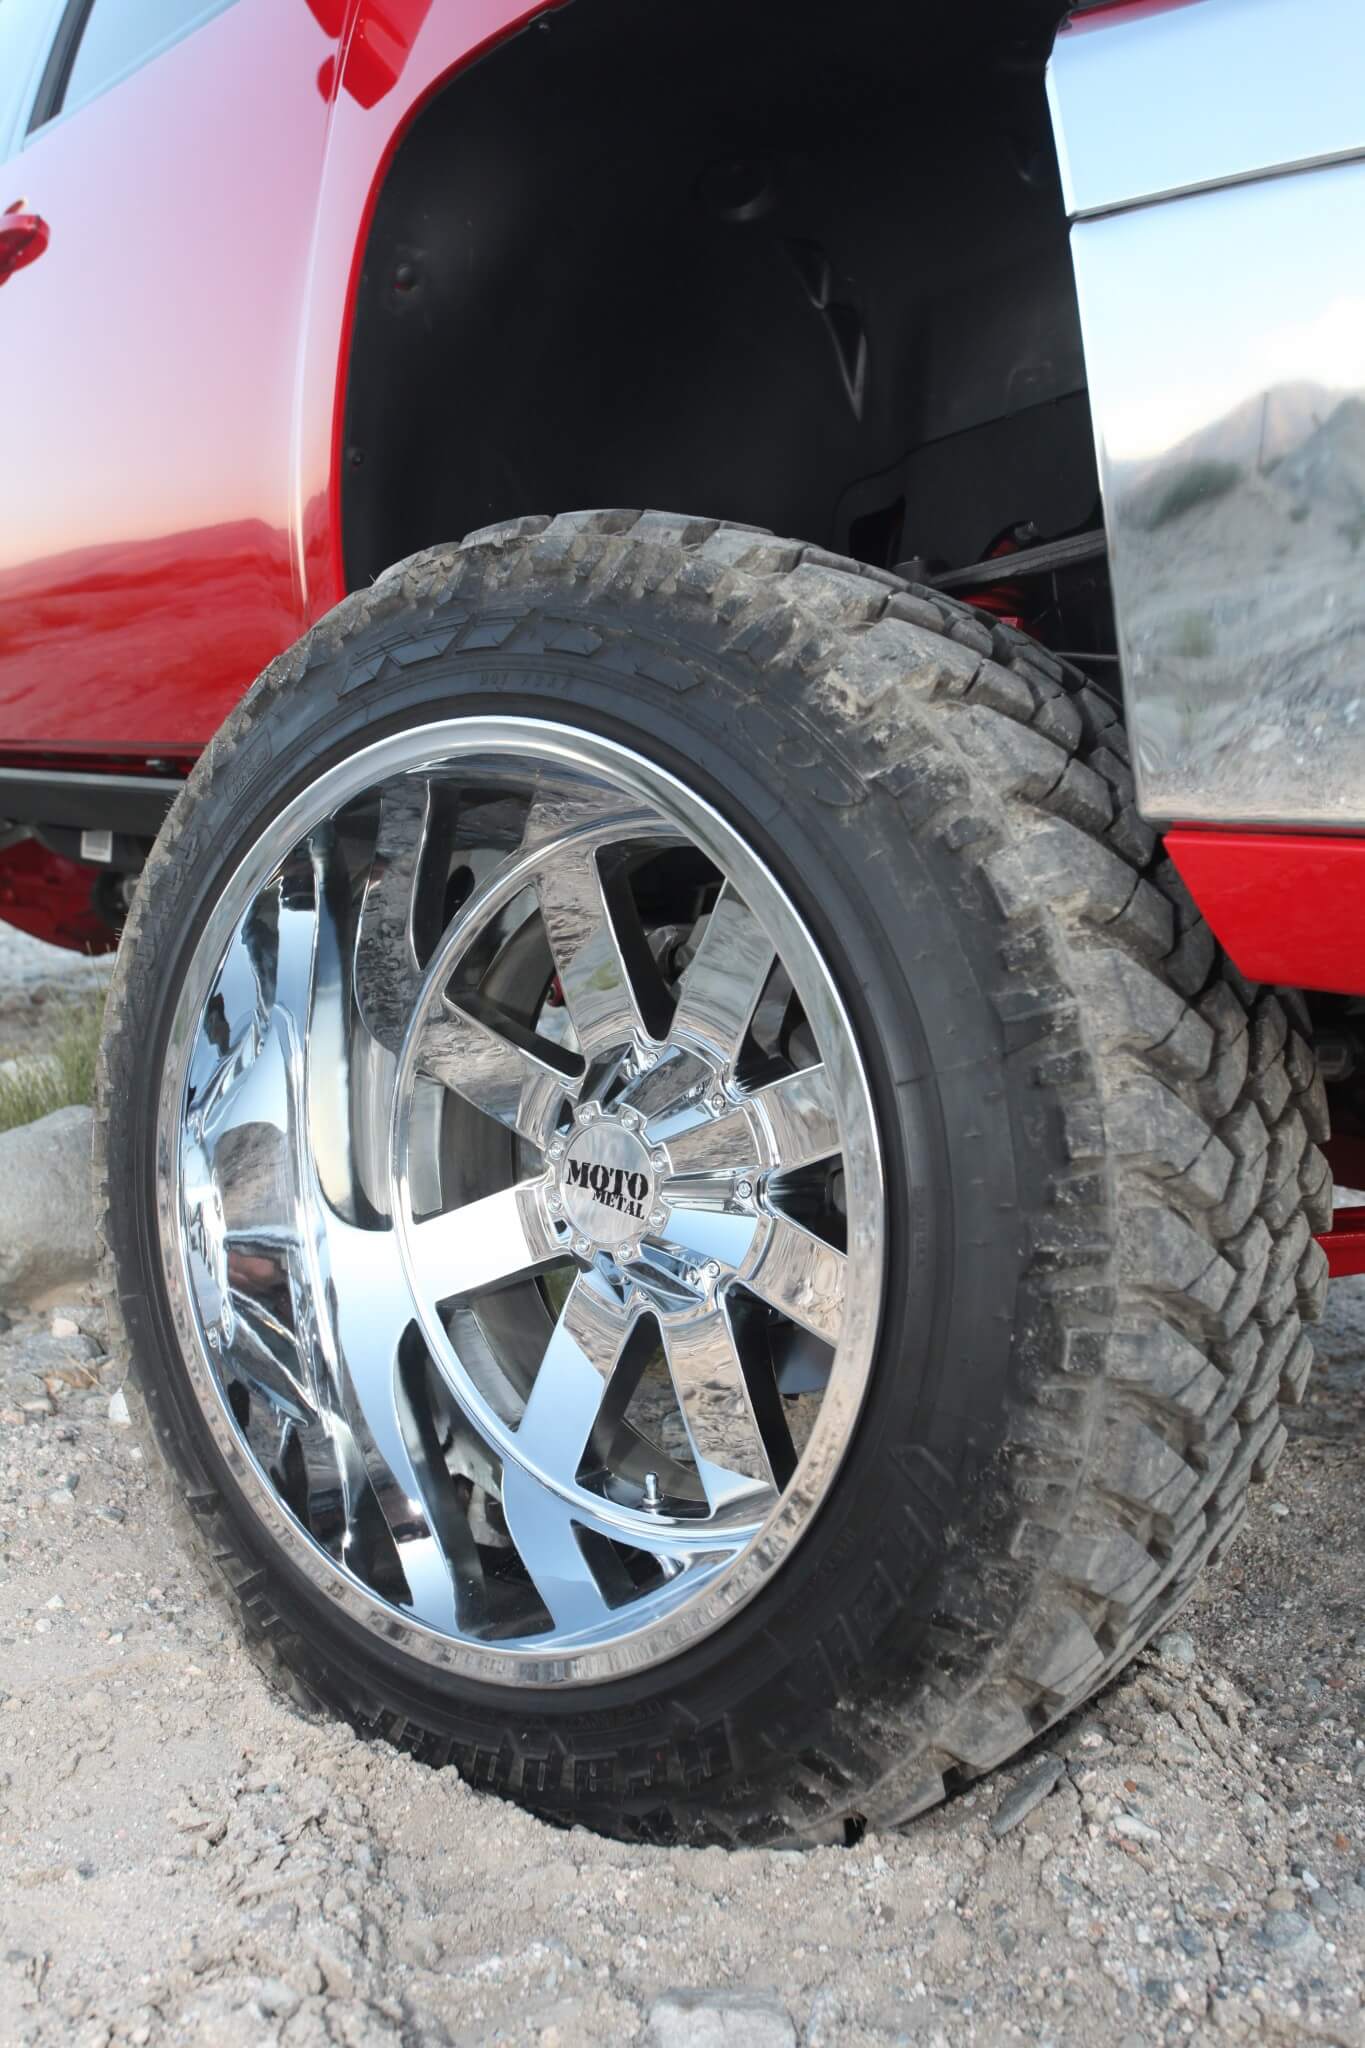 Giving the truck great off-road capabilities are the Nitto Trail Grappler tires have been mounted on eight-spoke Moto Metal 962 wheels. 